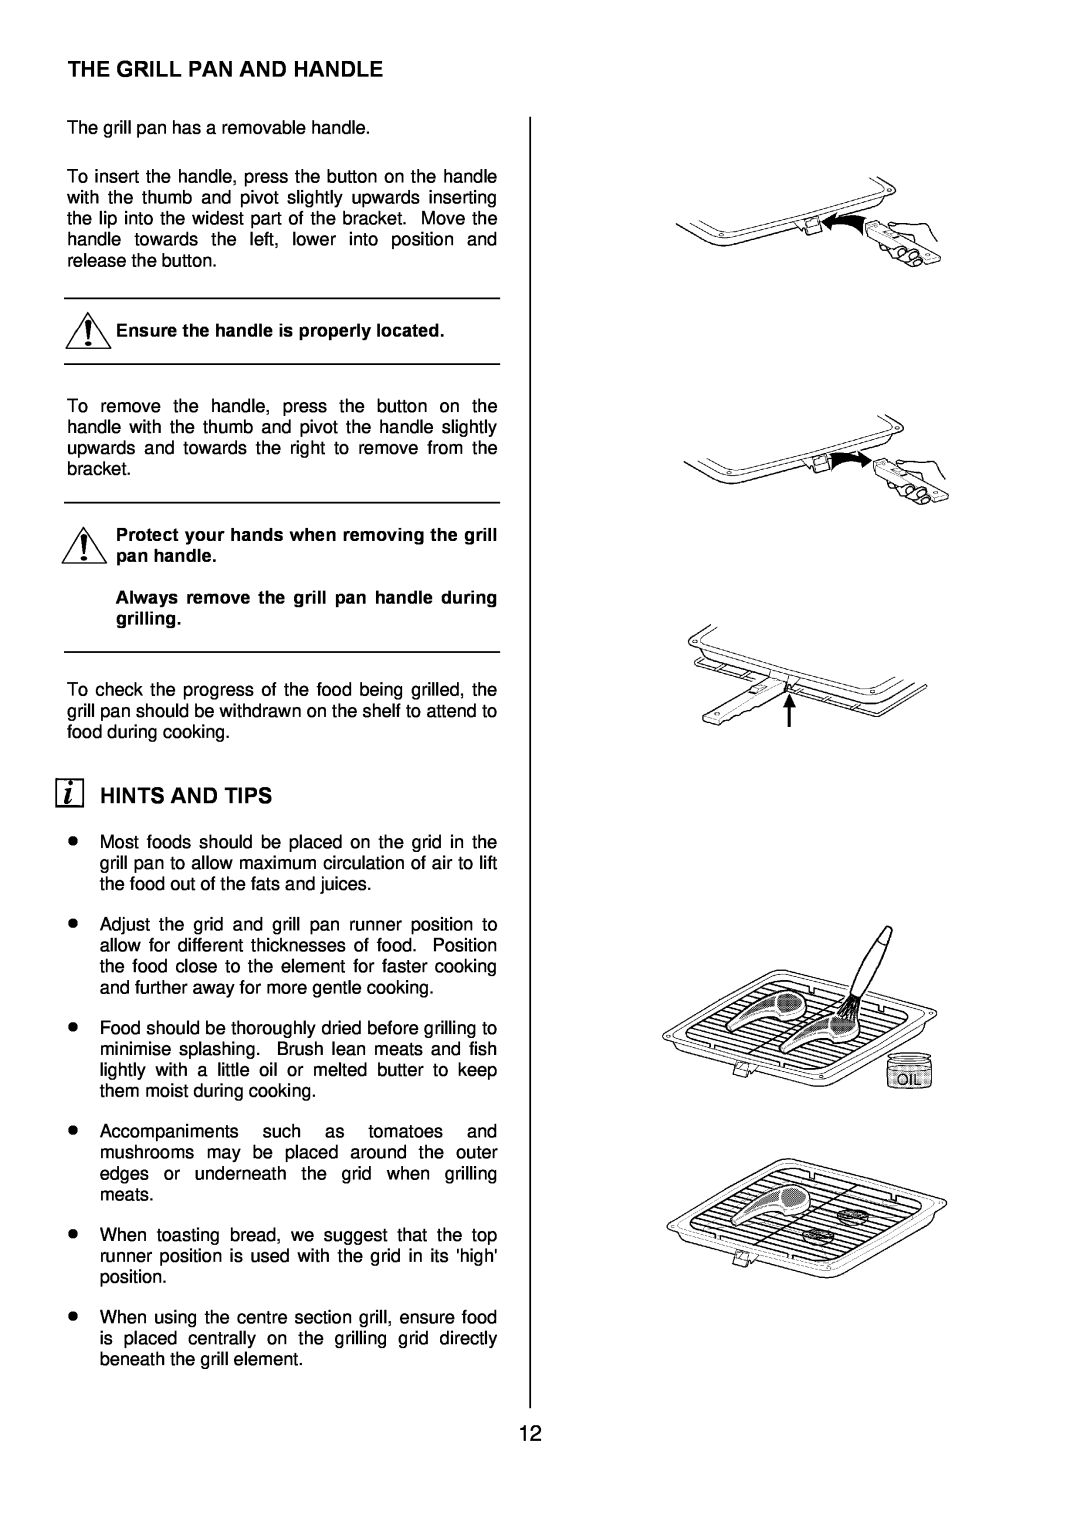 Zanussi ZOD 890 manual The Grill Pan And Handle, Hints And Tips, Ensure the handle is properly located 